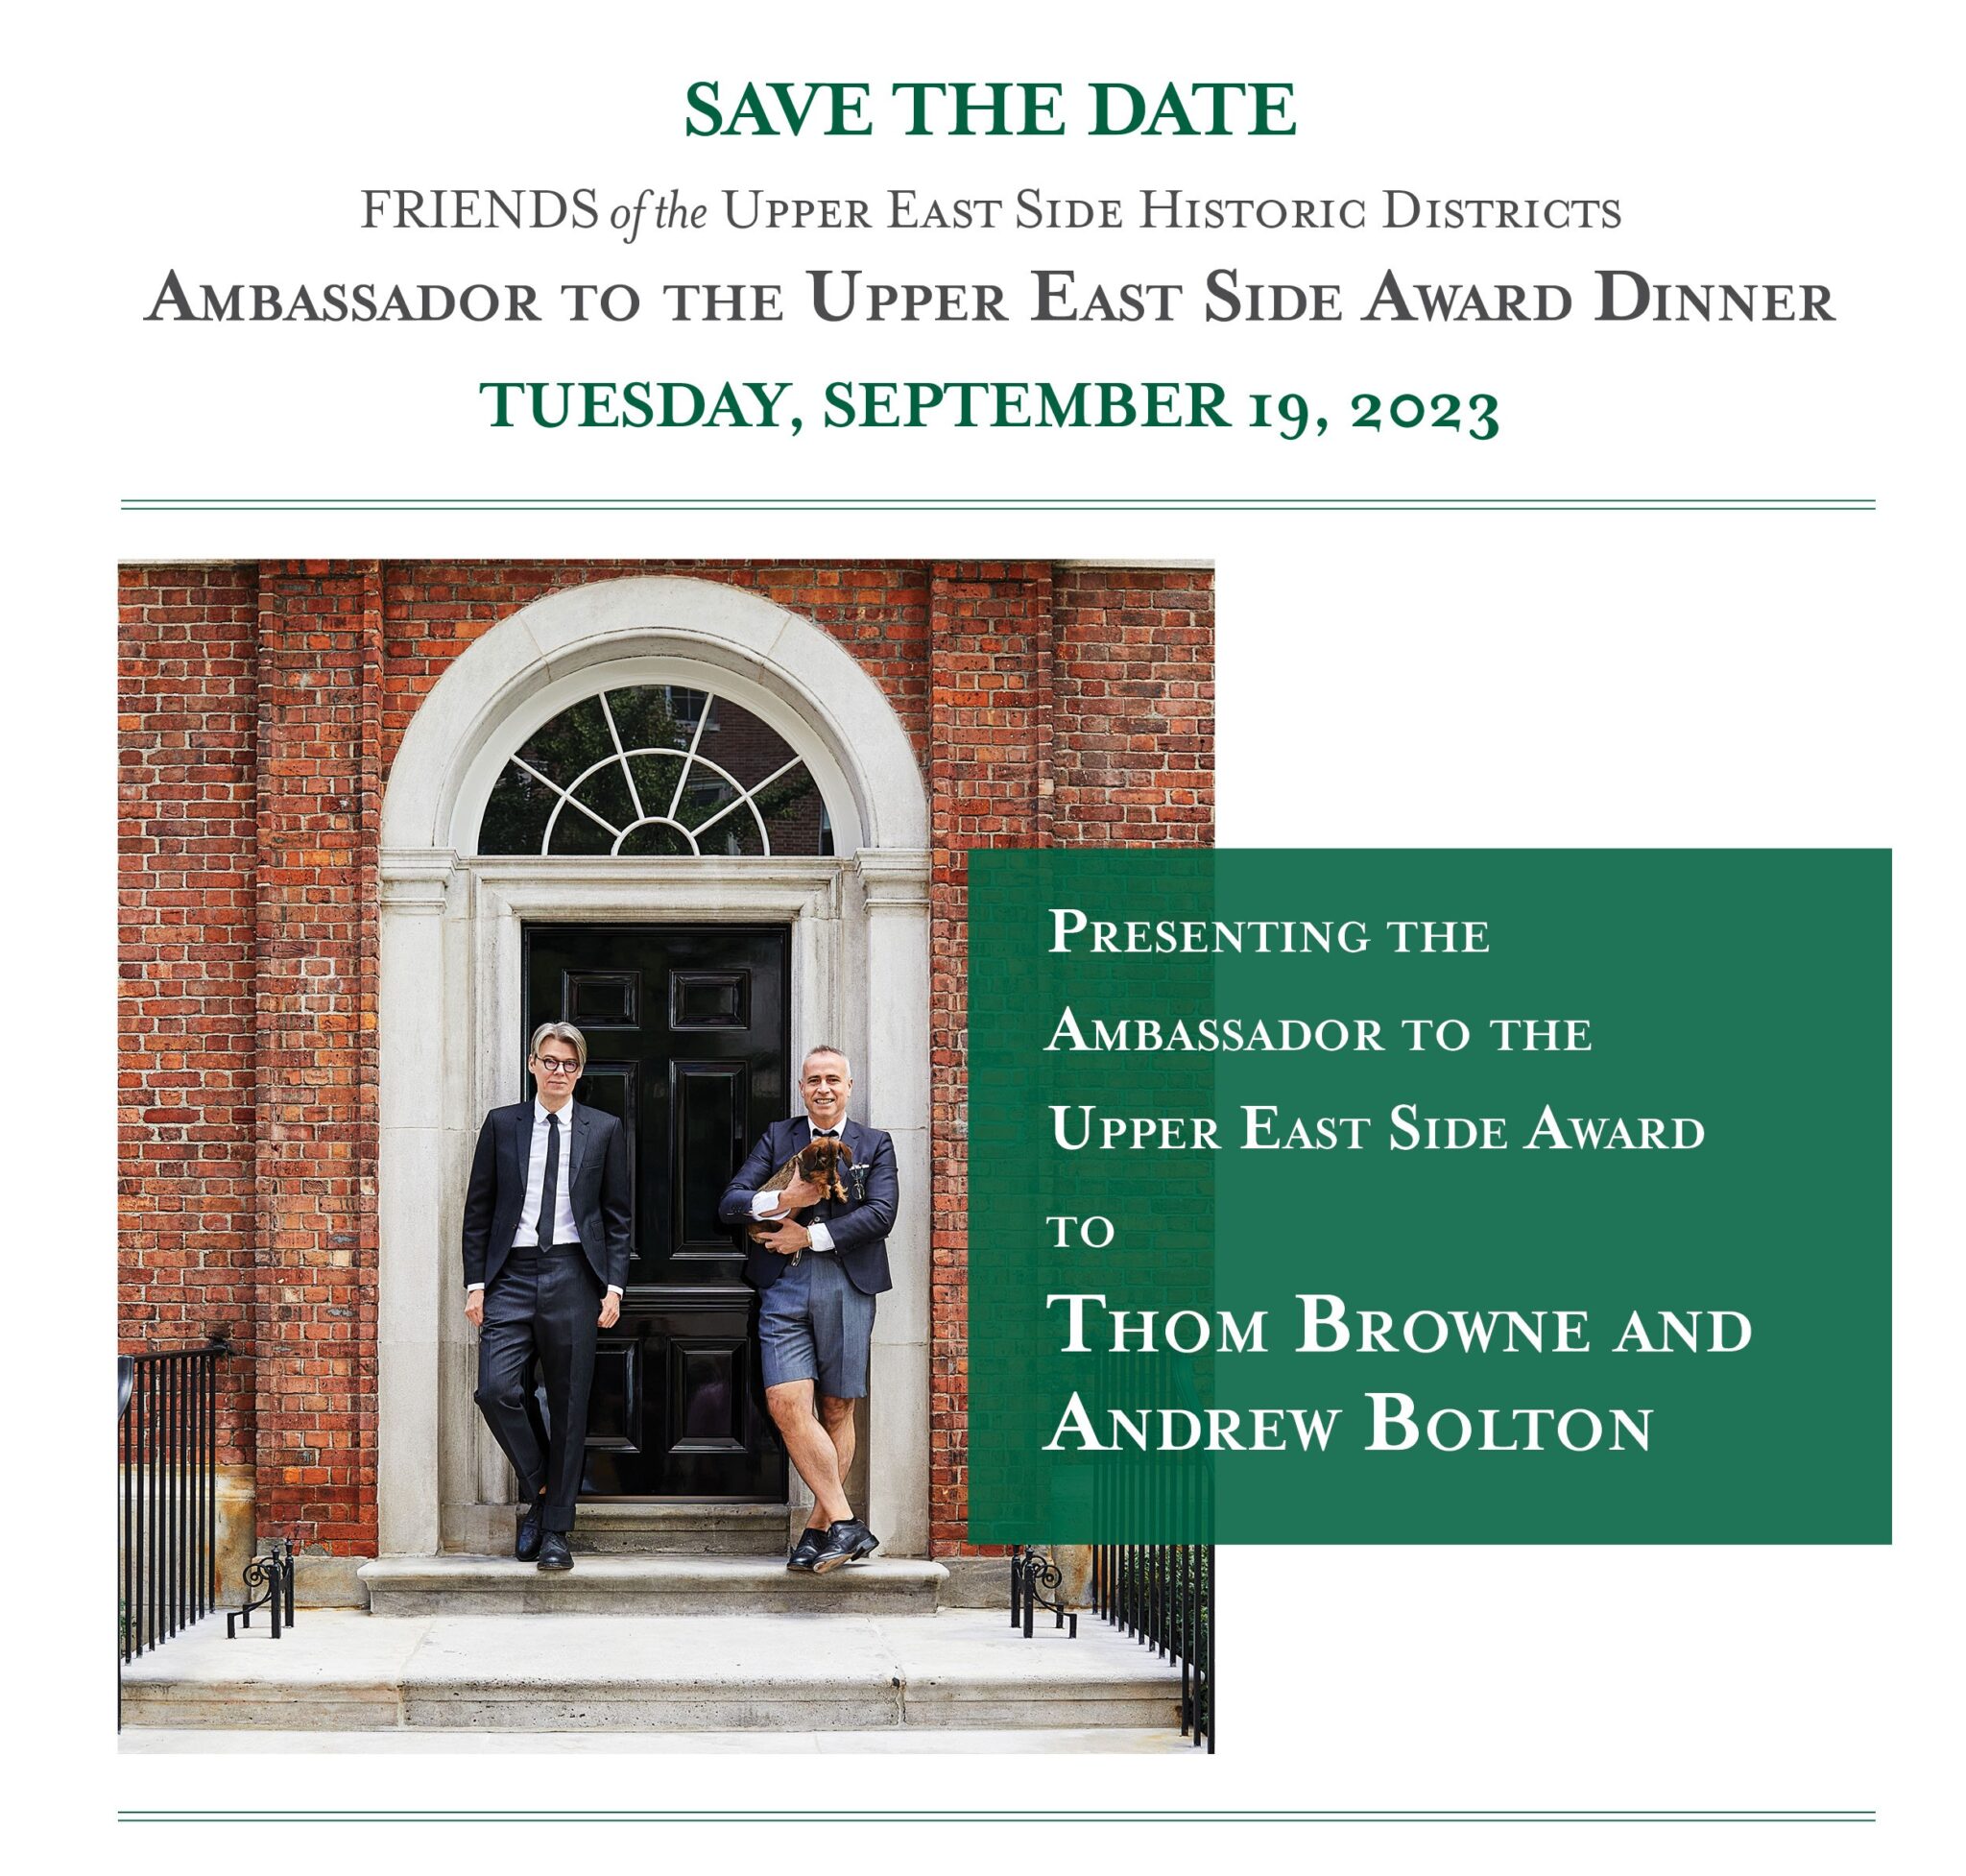 Save the date! FRIENDS of the Upper East Side Historic Districts Ambassador to the Upper East Side Award Dinner, Tuesday, September 19, 2023. Presenting the Ambassador to the Upper East Side Award to Thom Browne and Andrew Bolton. Image courtesy of Architectural Digest. Photo by William Abranowicz. Layout by Betsy Blazar.